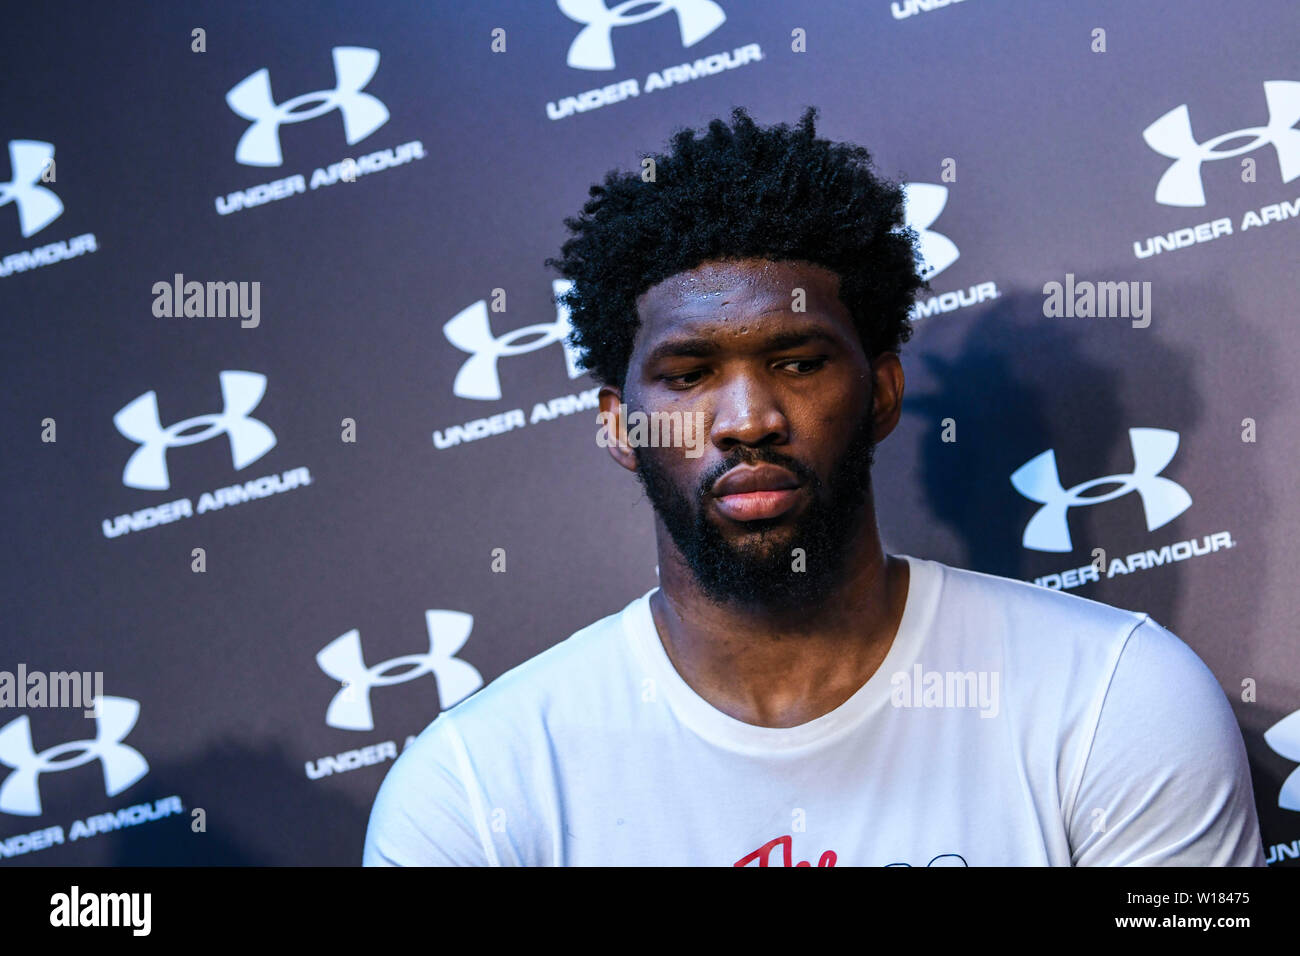 NBA star Joel Embiid of Philadelphia 76ers attends a press conference for  the 2019 Under Armour Basketball Asia Tour in Shanghai, China, 29 June 2019  Stock Photo - Alamy